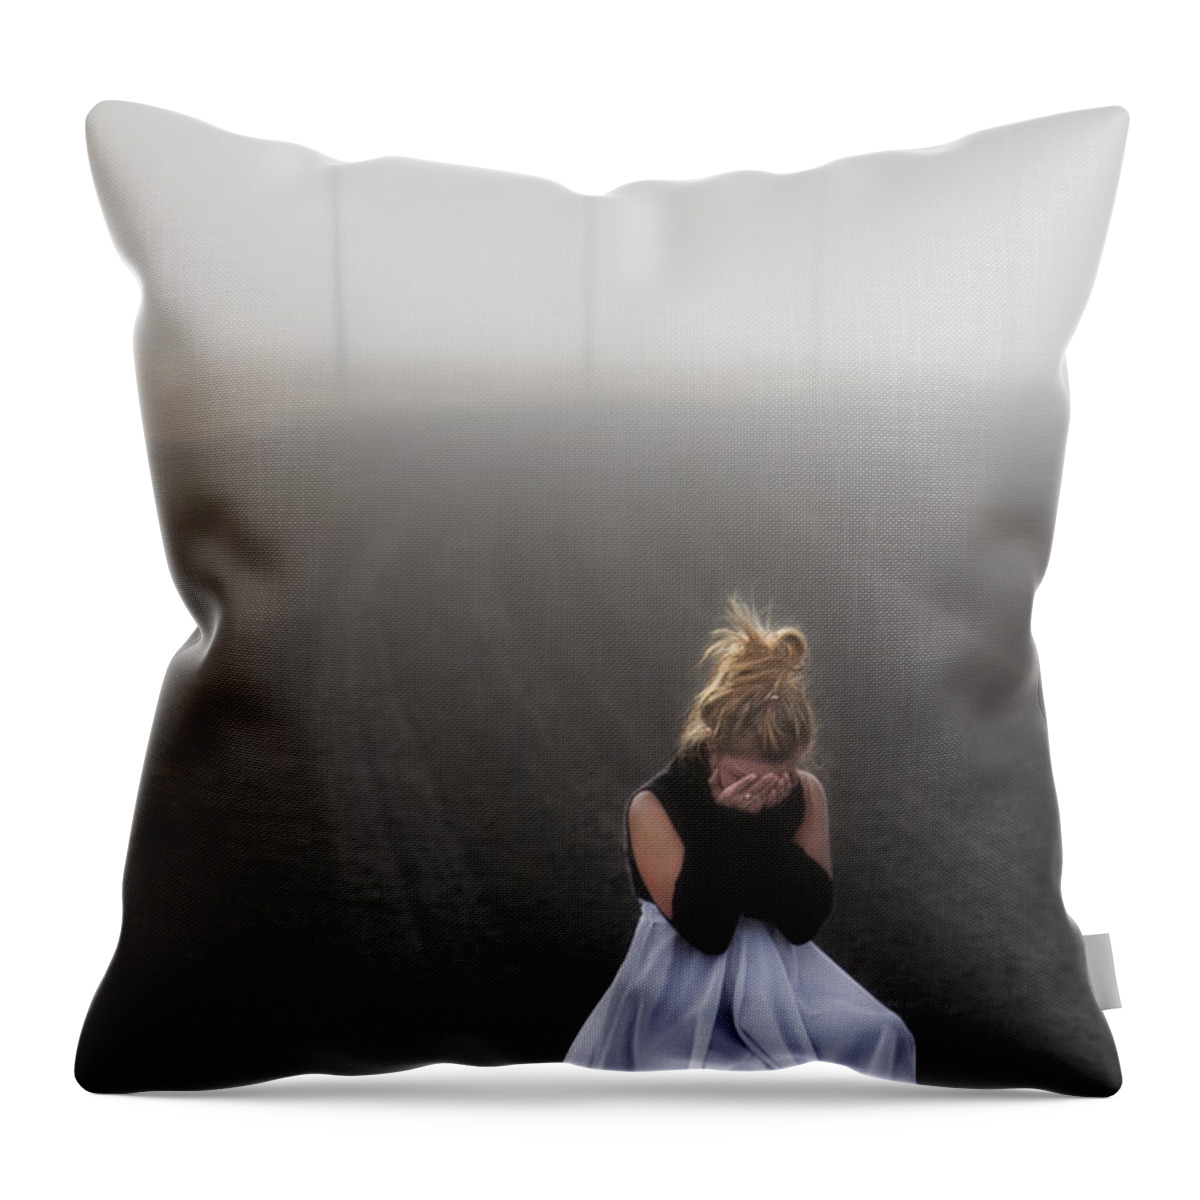 Girl Throw Pillow featuring the photograph And Tears Shall Drown The Wind by Evelina Kremsdorf